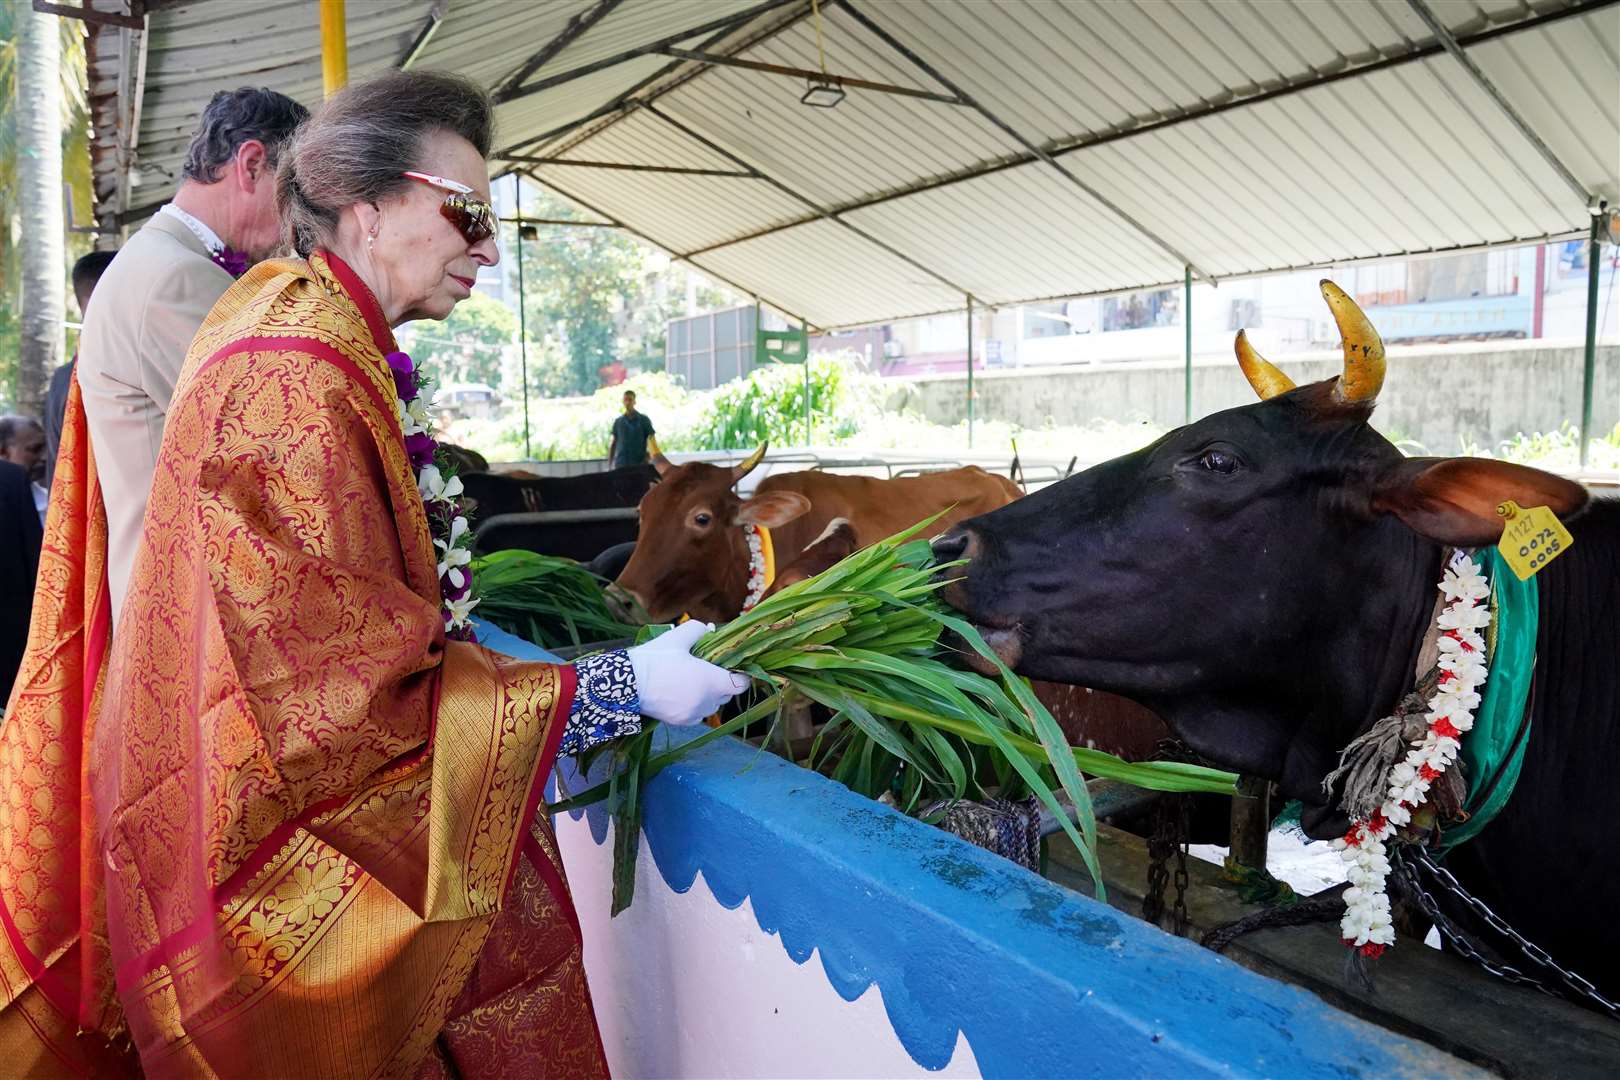 The royal couple were invited to feed sacred cows during their visit (Jonathan Brady/PA)